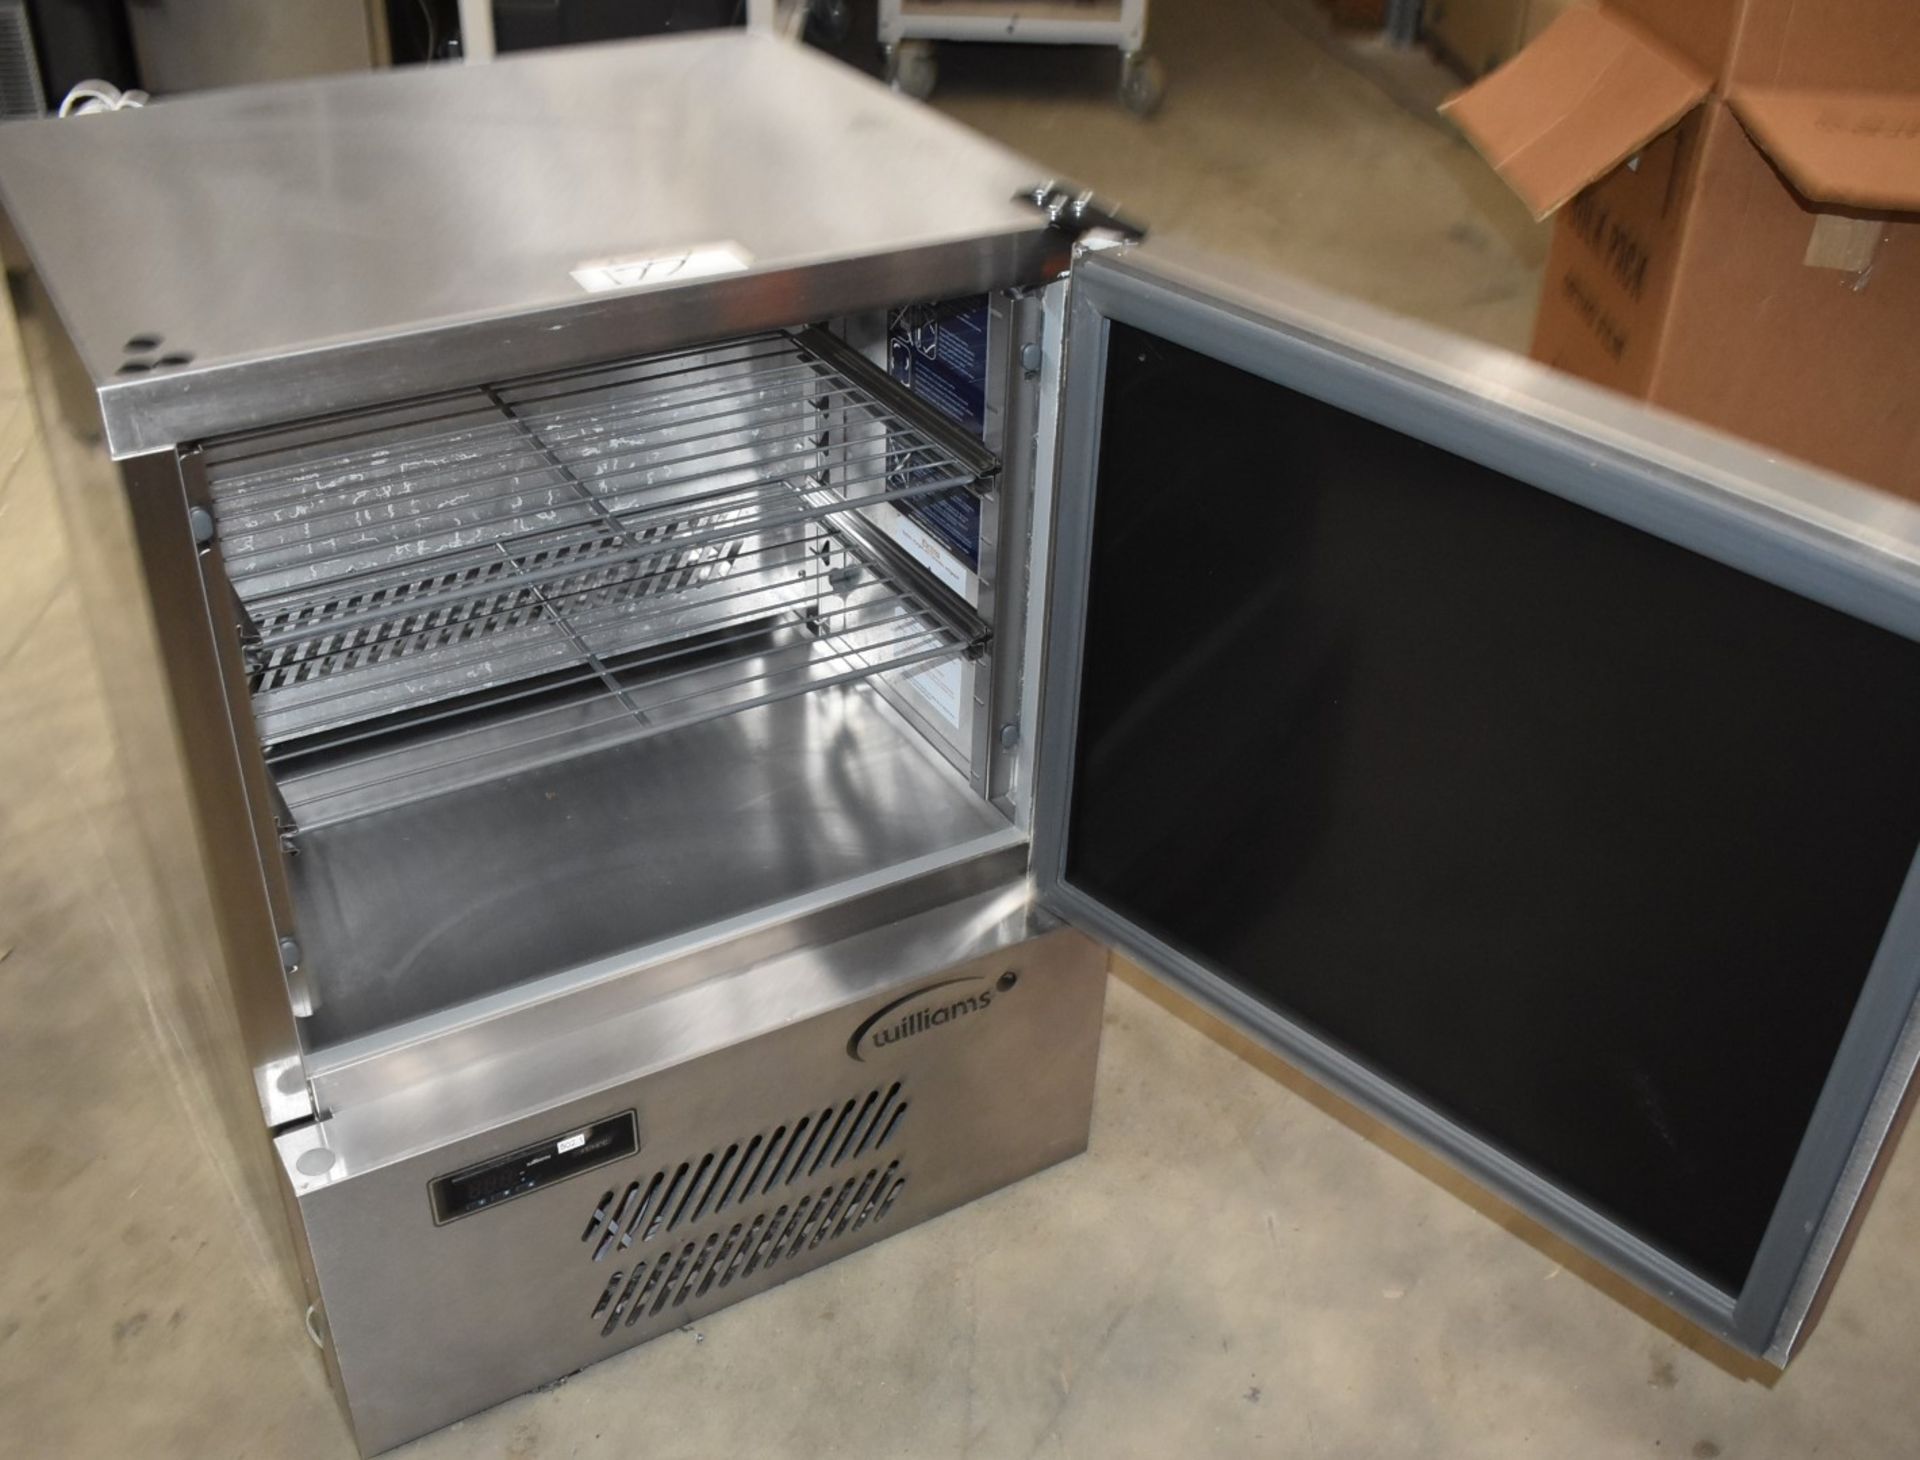 1 x Williams H5UC R290 R1 Single Door Stainless Steel Undercounter Fridge With Easy Grab Handle - Image 3 of 4